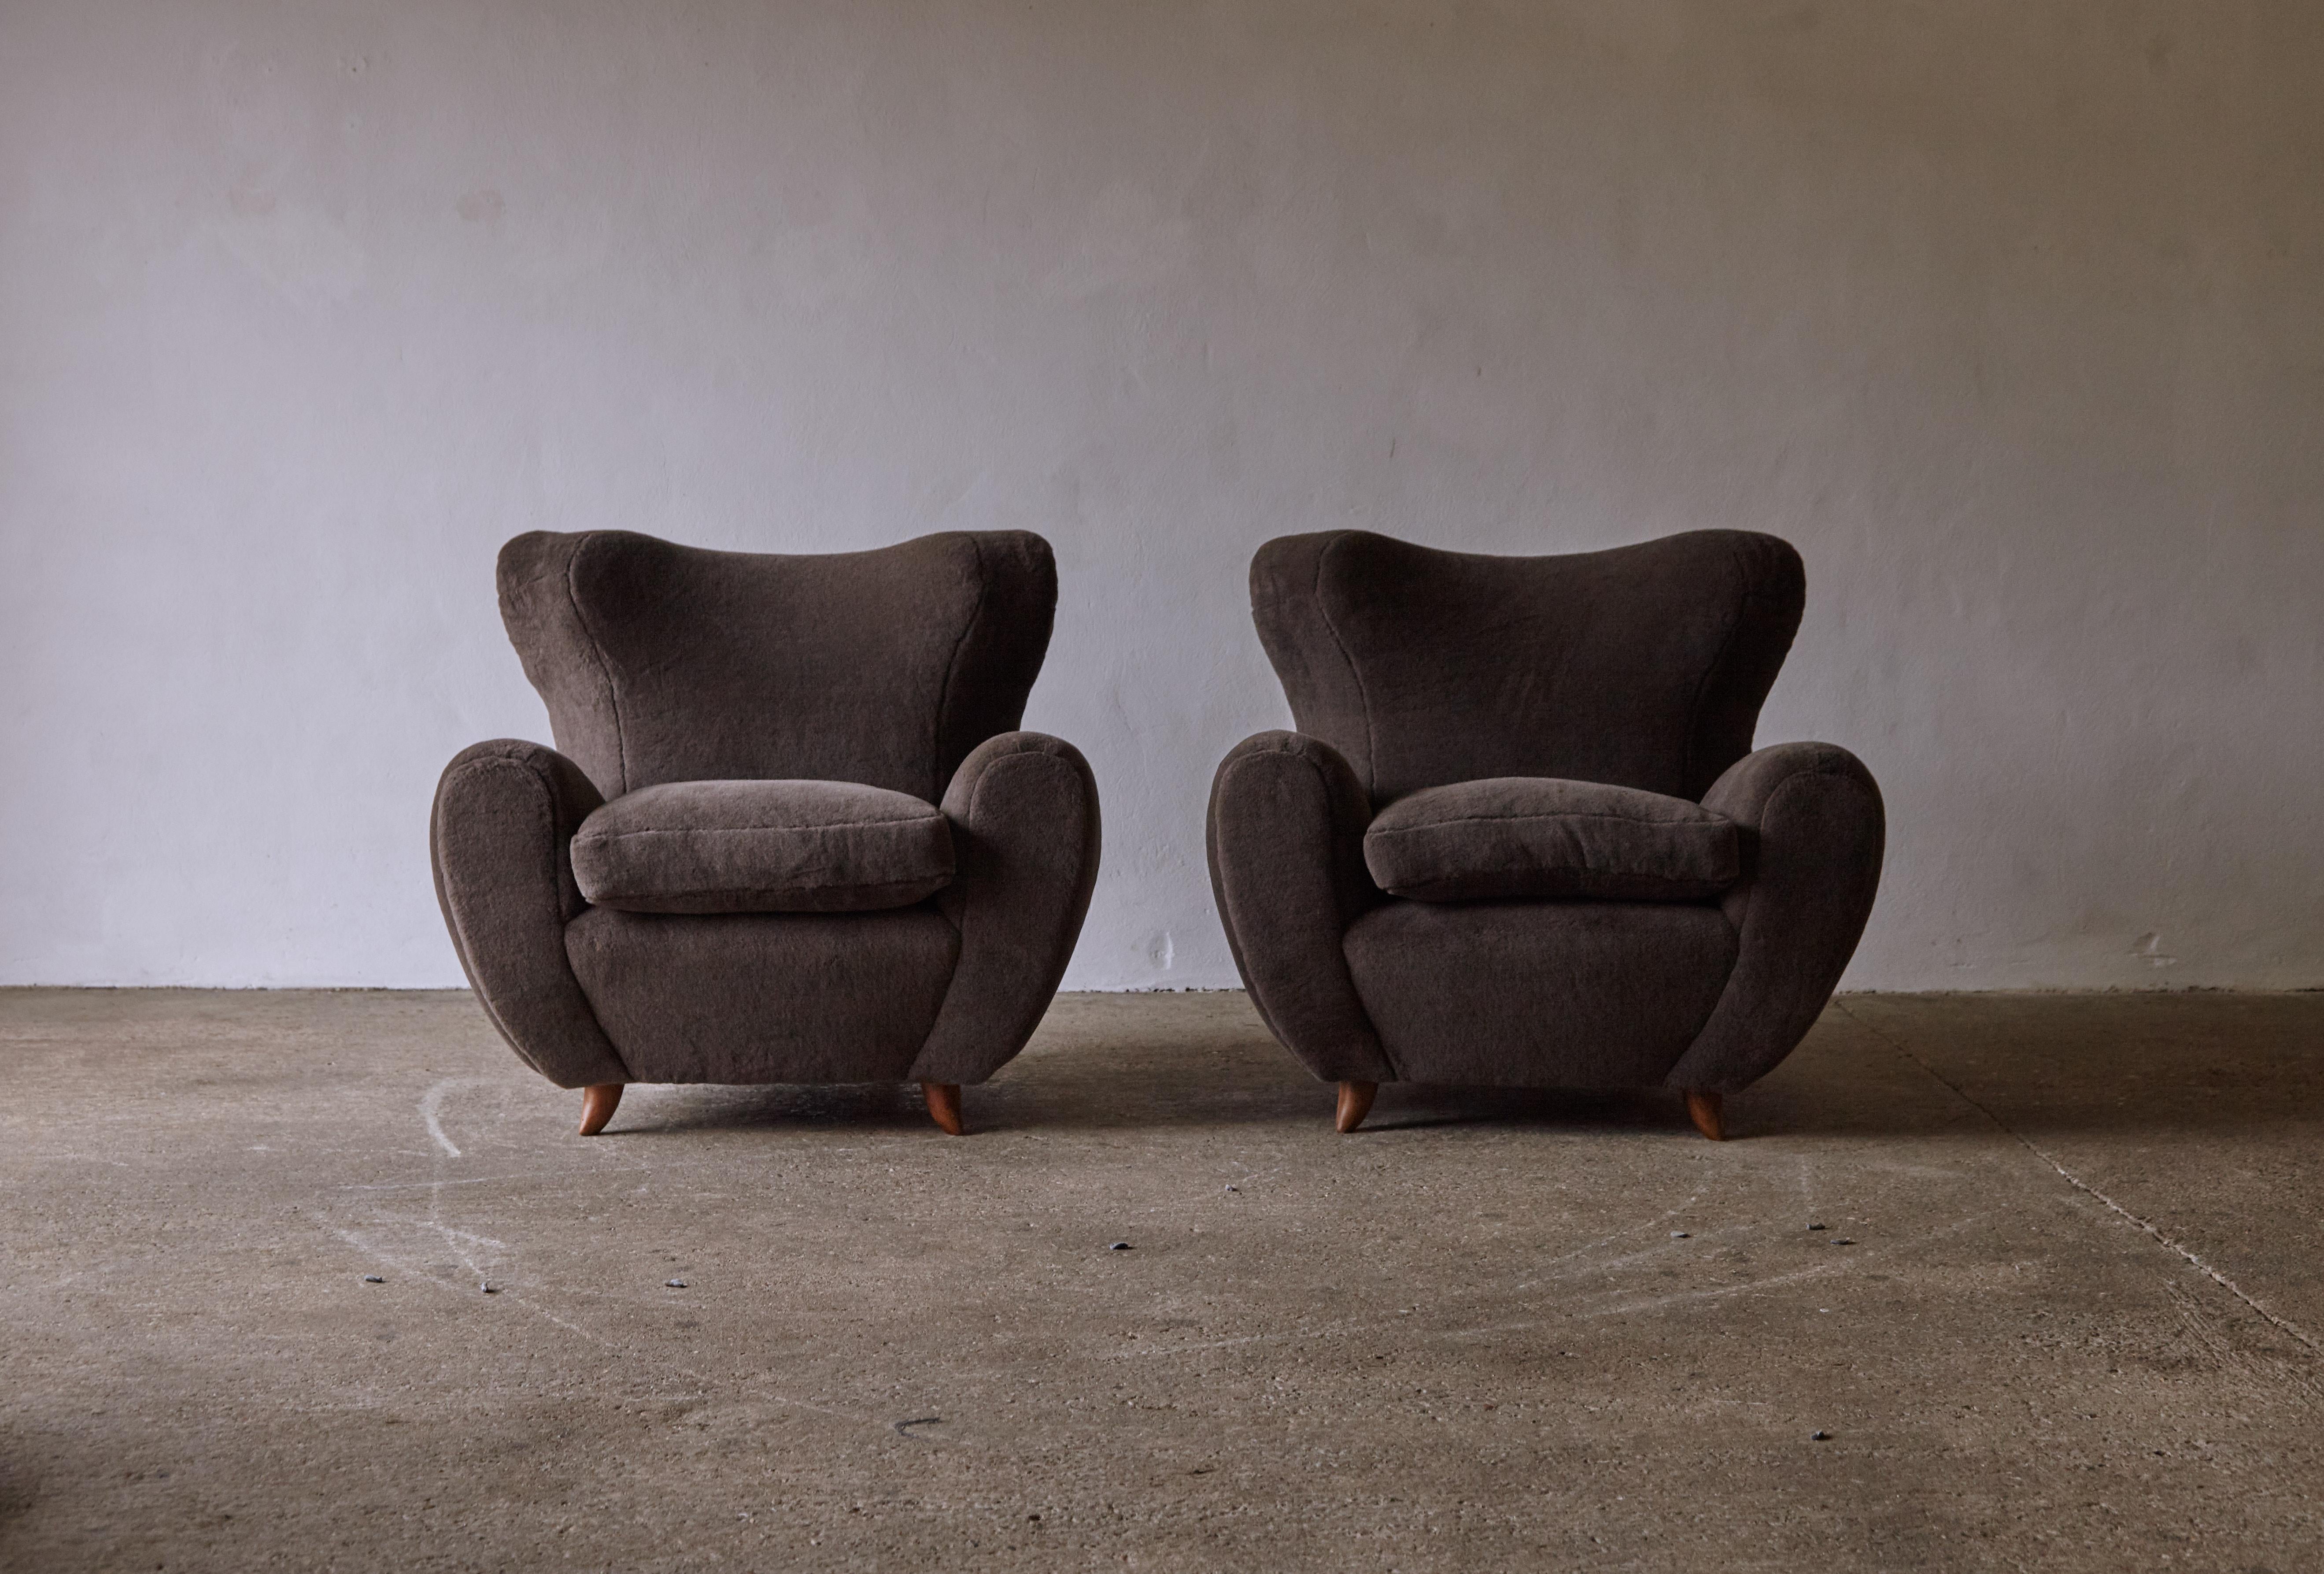 Exceptional Lounge Chairs, Upholstered in Alpaca, Italy, 1950s For Sale 3